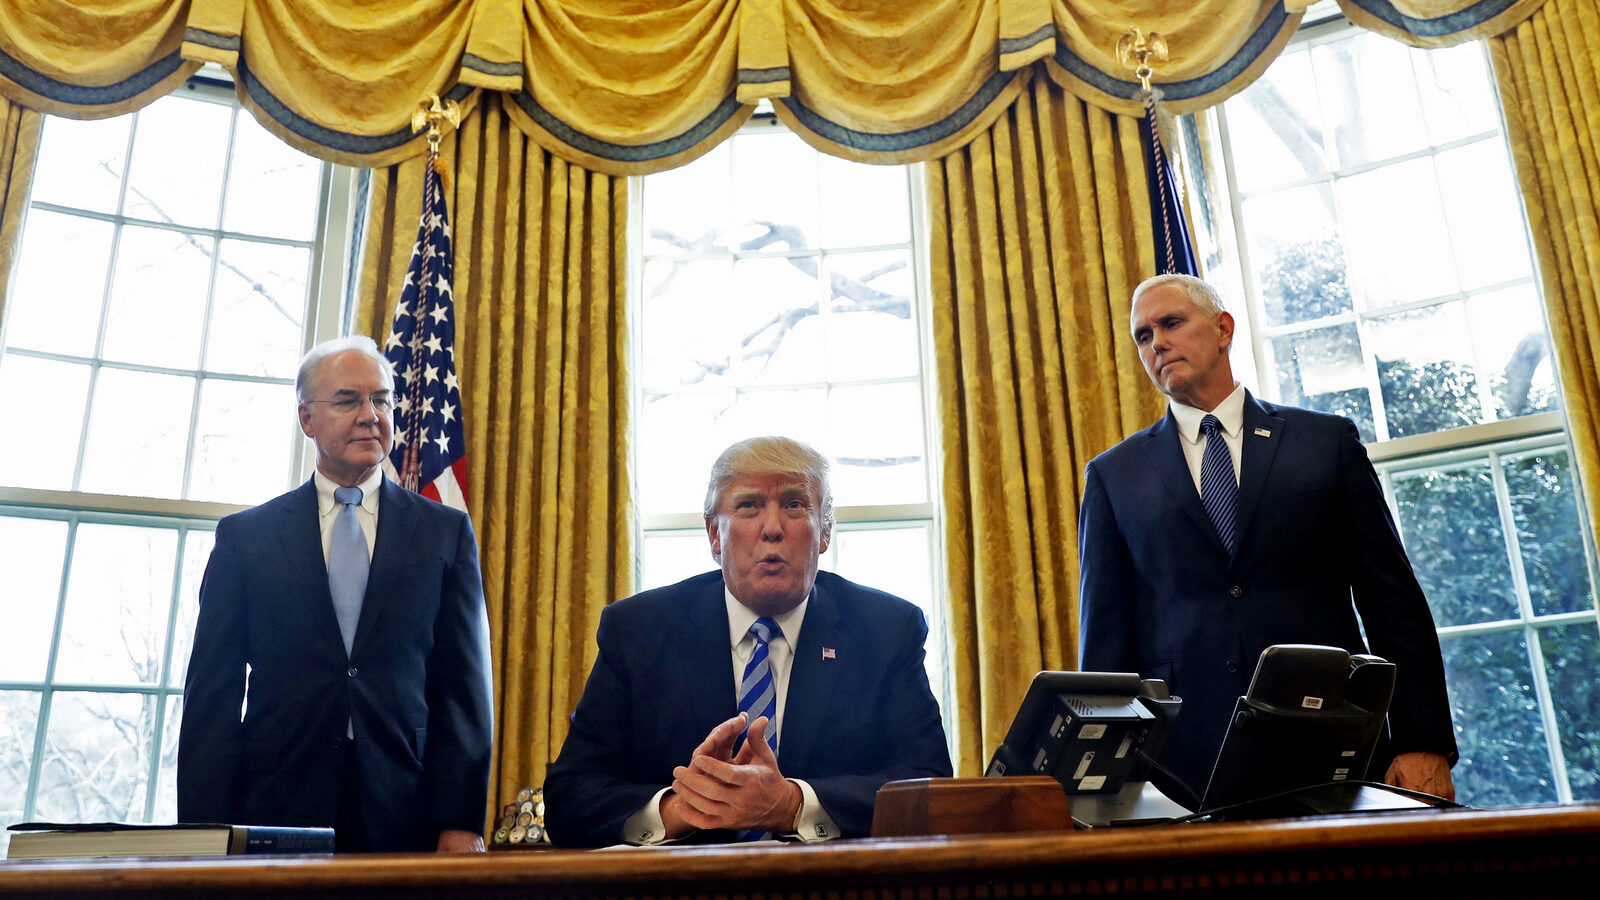 President Donald Trump, flanked by Health and Human Services Secretary Tom Price, left, and Vice President Mike Pence, meets with members of the media regarding the health care overhaul bill, March 24, 2017. (AP/Pablo Martinez Monsivais)